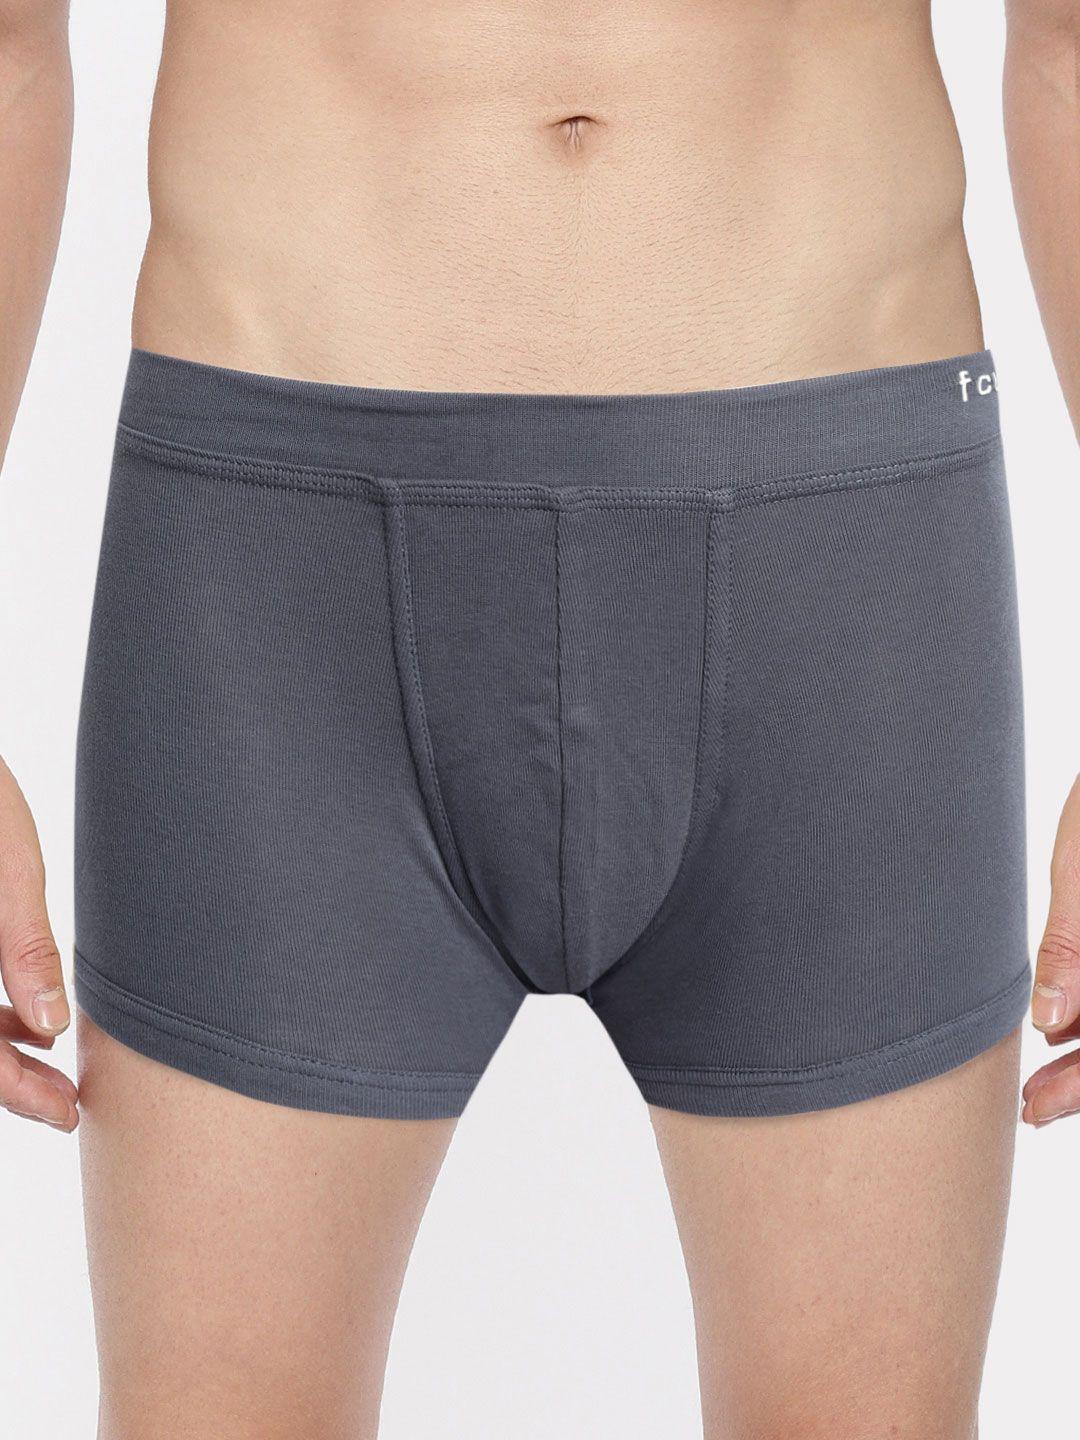 fcuk men charcoal grey solid trunks ctr12